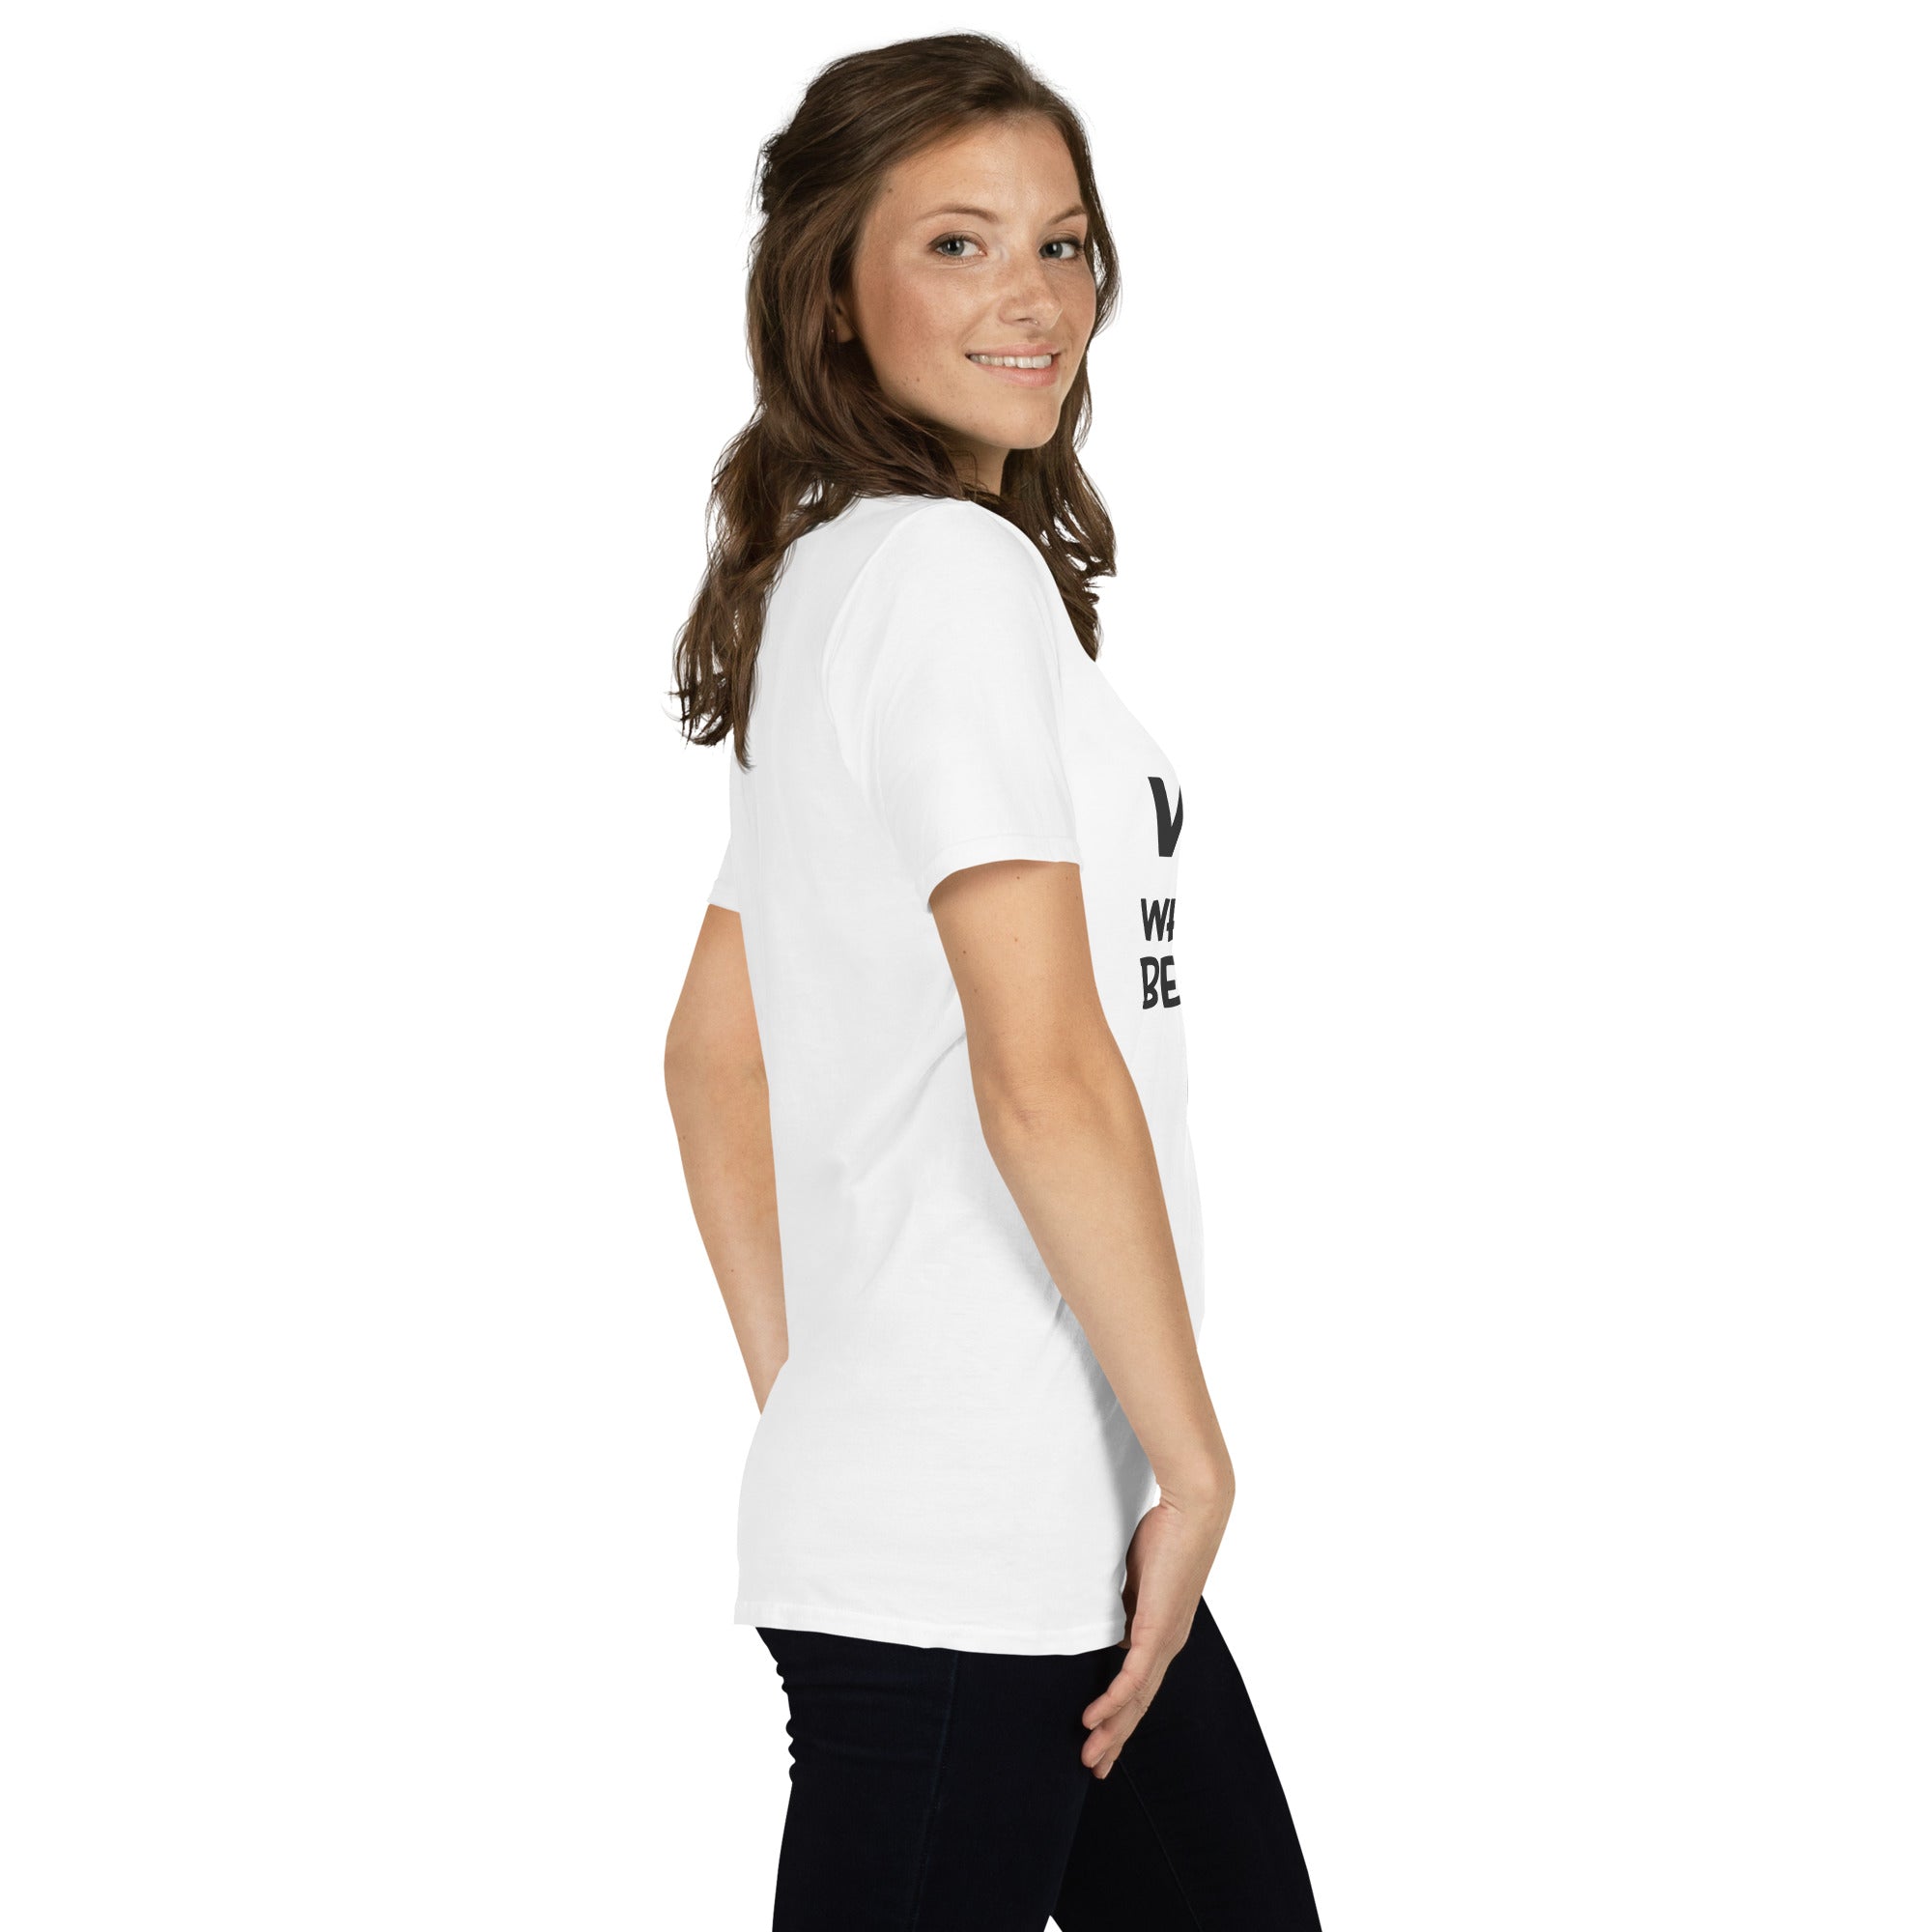 Short-Sleeve Unisex T-Shirt- In a world where you can be